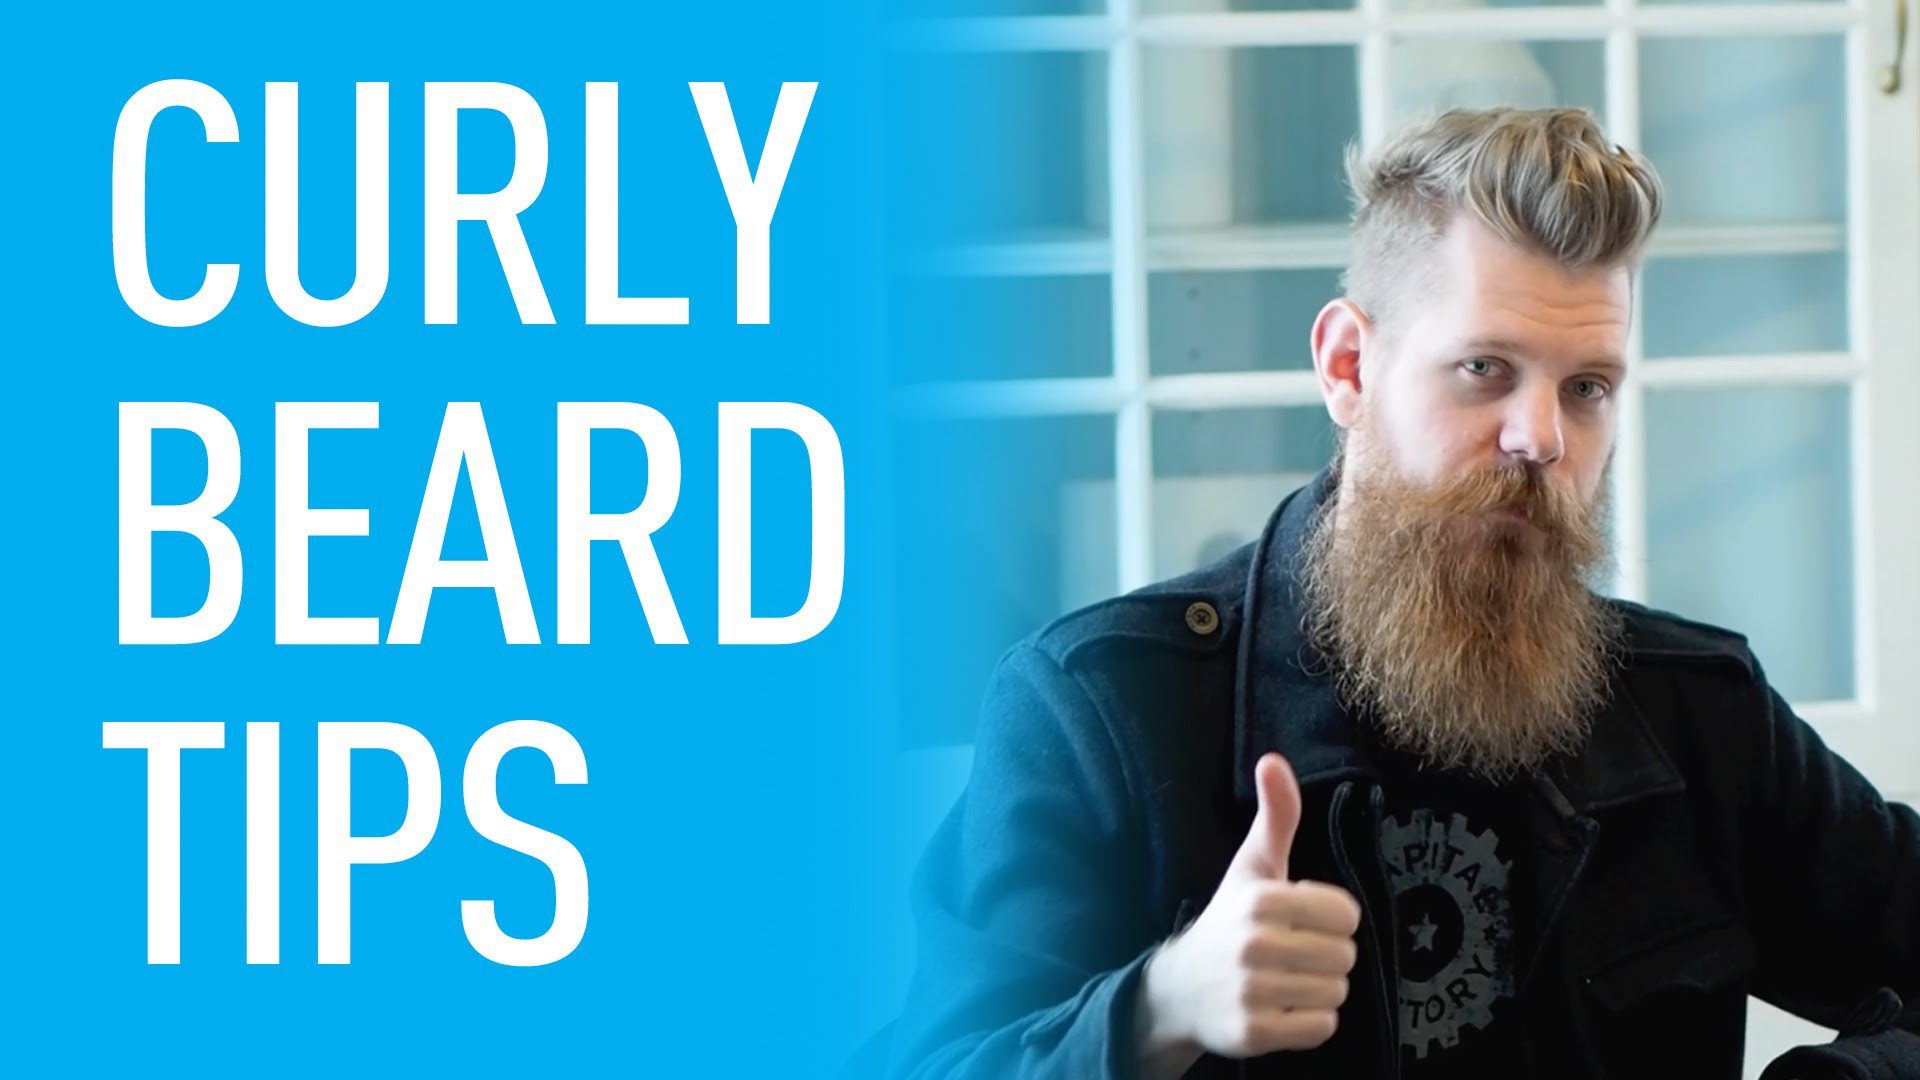 How To Deal With Curly Beards | Eric Bandholz - Good Beard Day